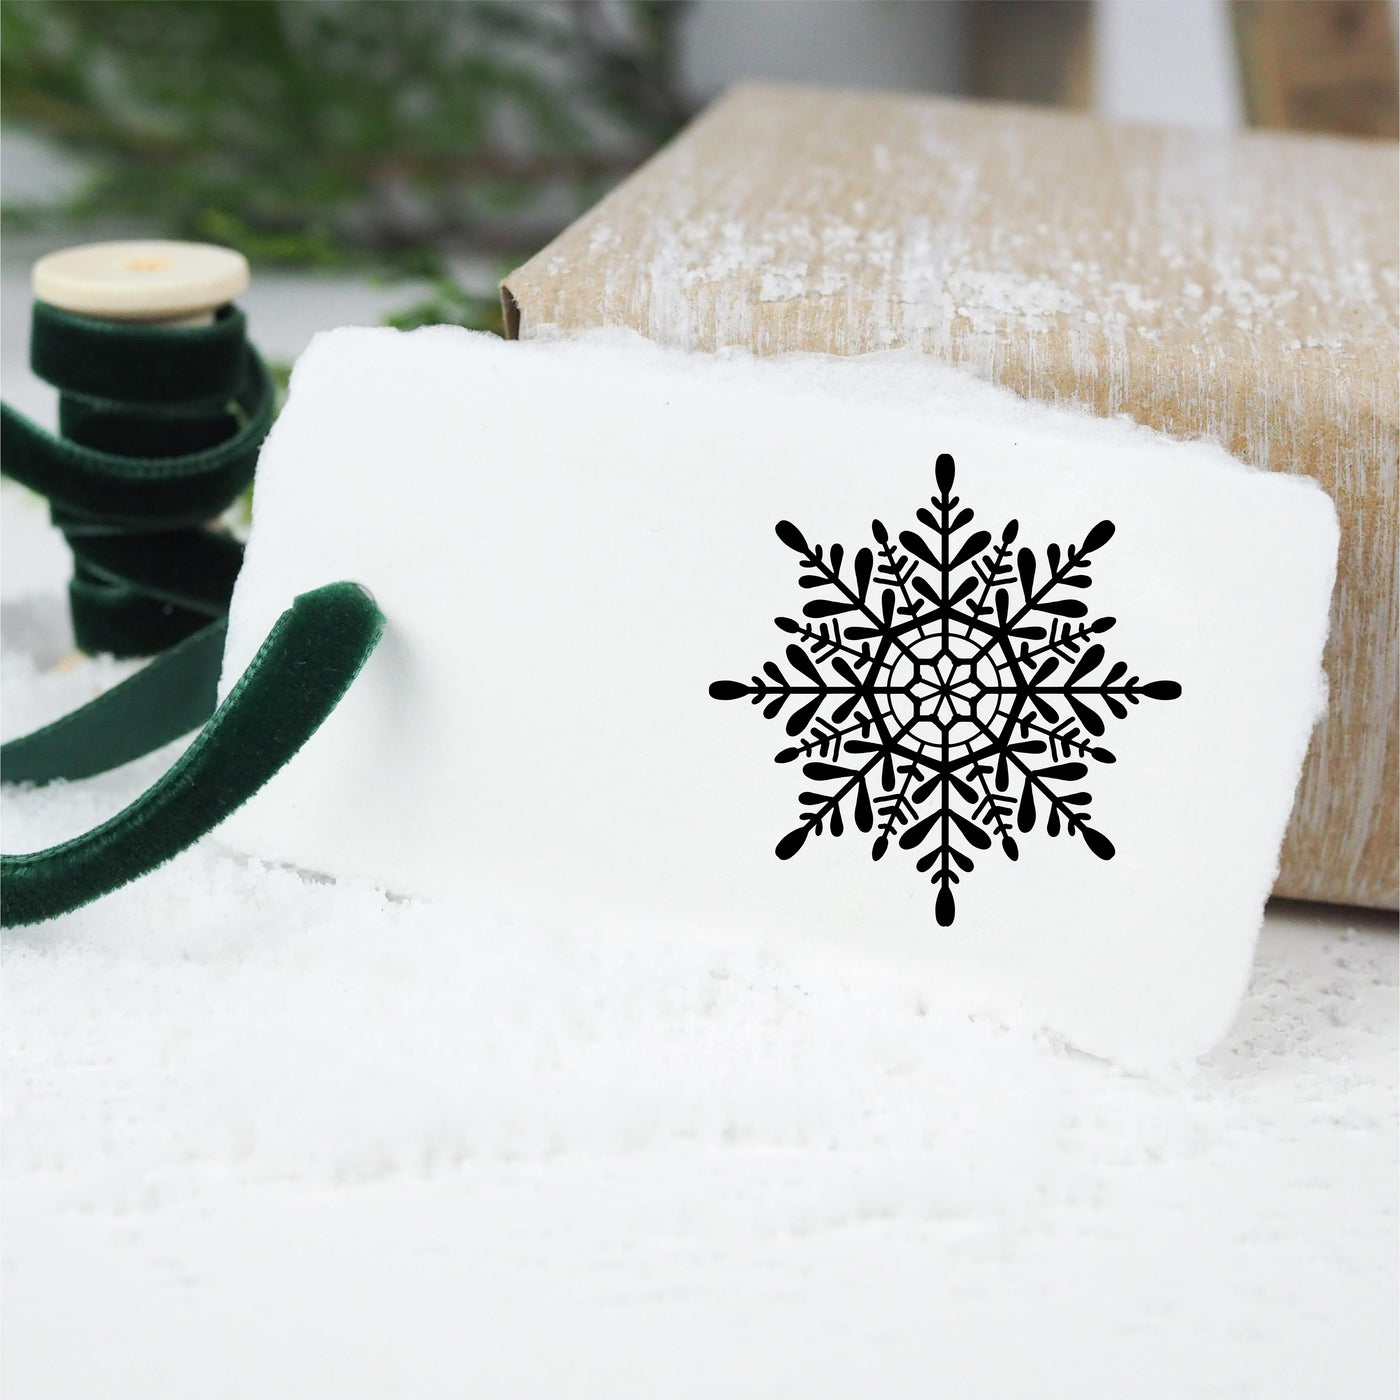 Snowflake Rubber Stamp - Black Graphic, Colored Text Options